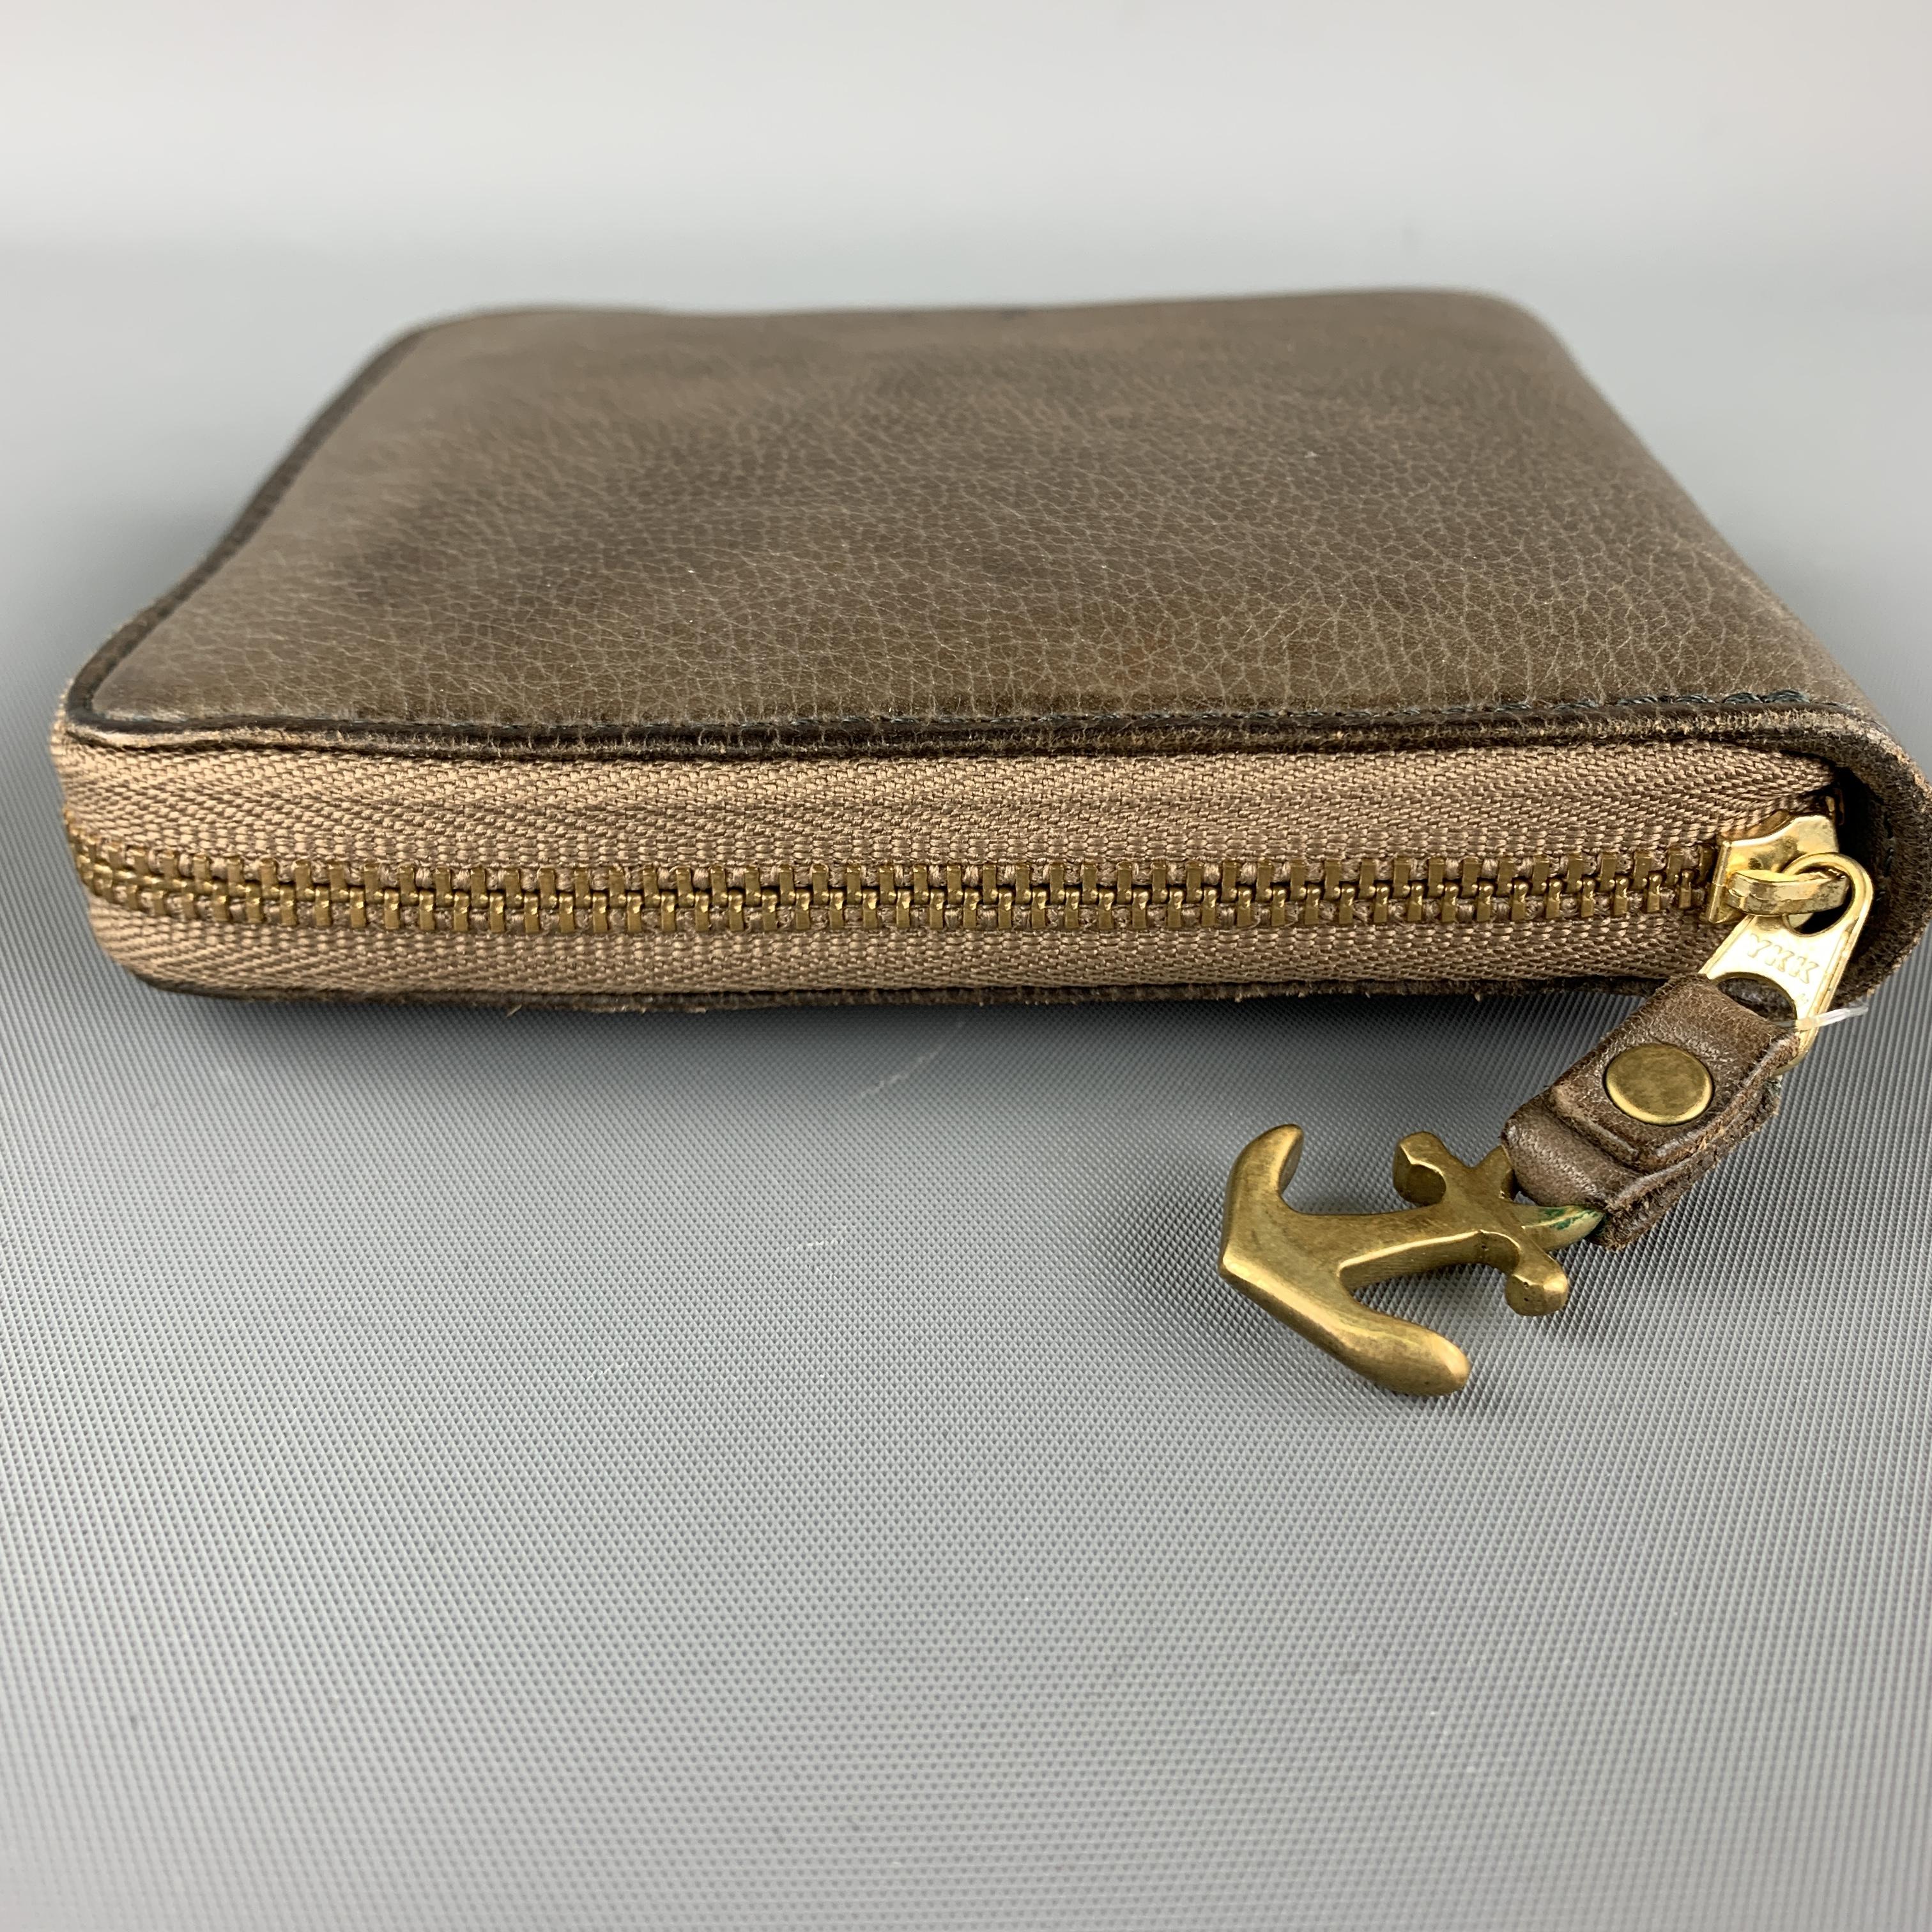 DAMASQUINA wallet comes in a brown leather featuring a bill compartment, card slots, and a zipper closure. As Is. 

New With Box.

Measurements:

Length: 4.5 in.
Width: 1 in.
Height: 4 in.

 

SKU: 100371
Category: Wallet

More Details
Brand: